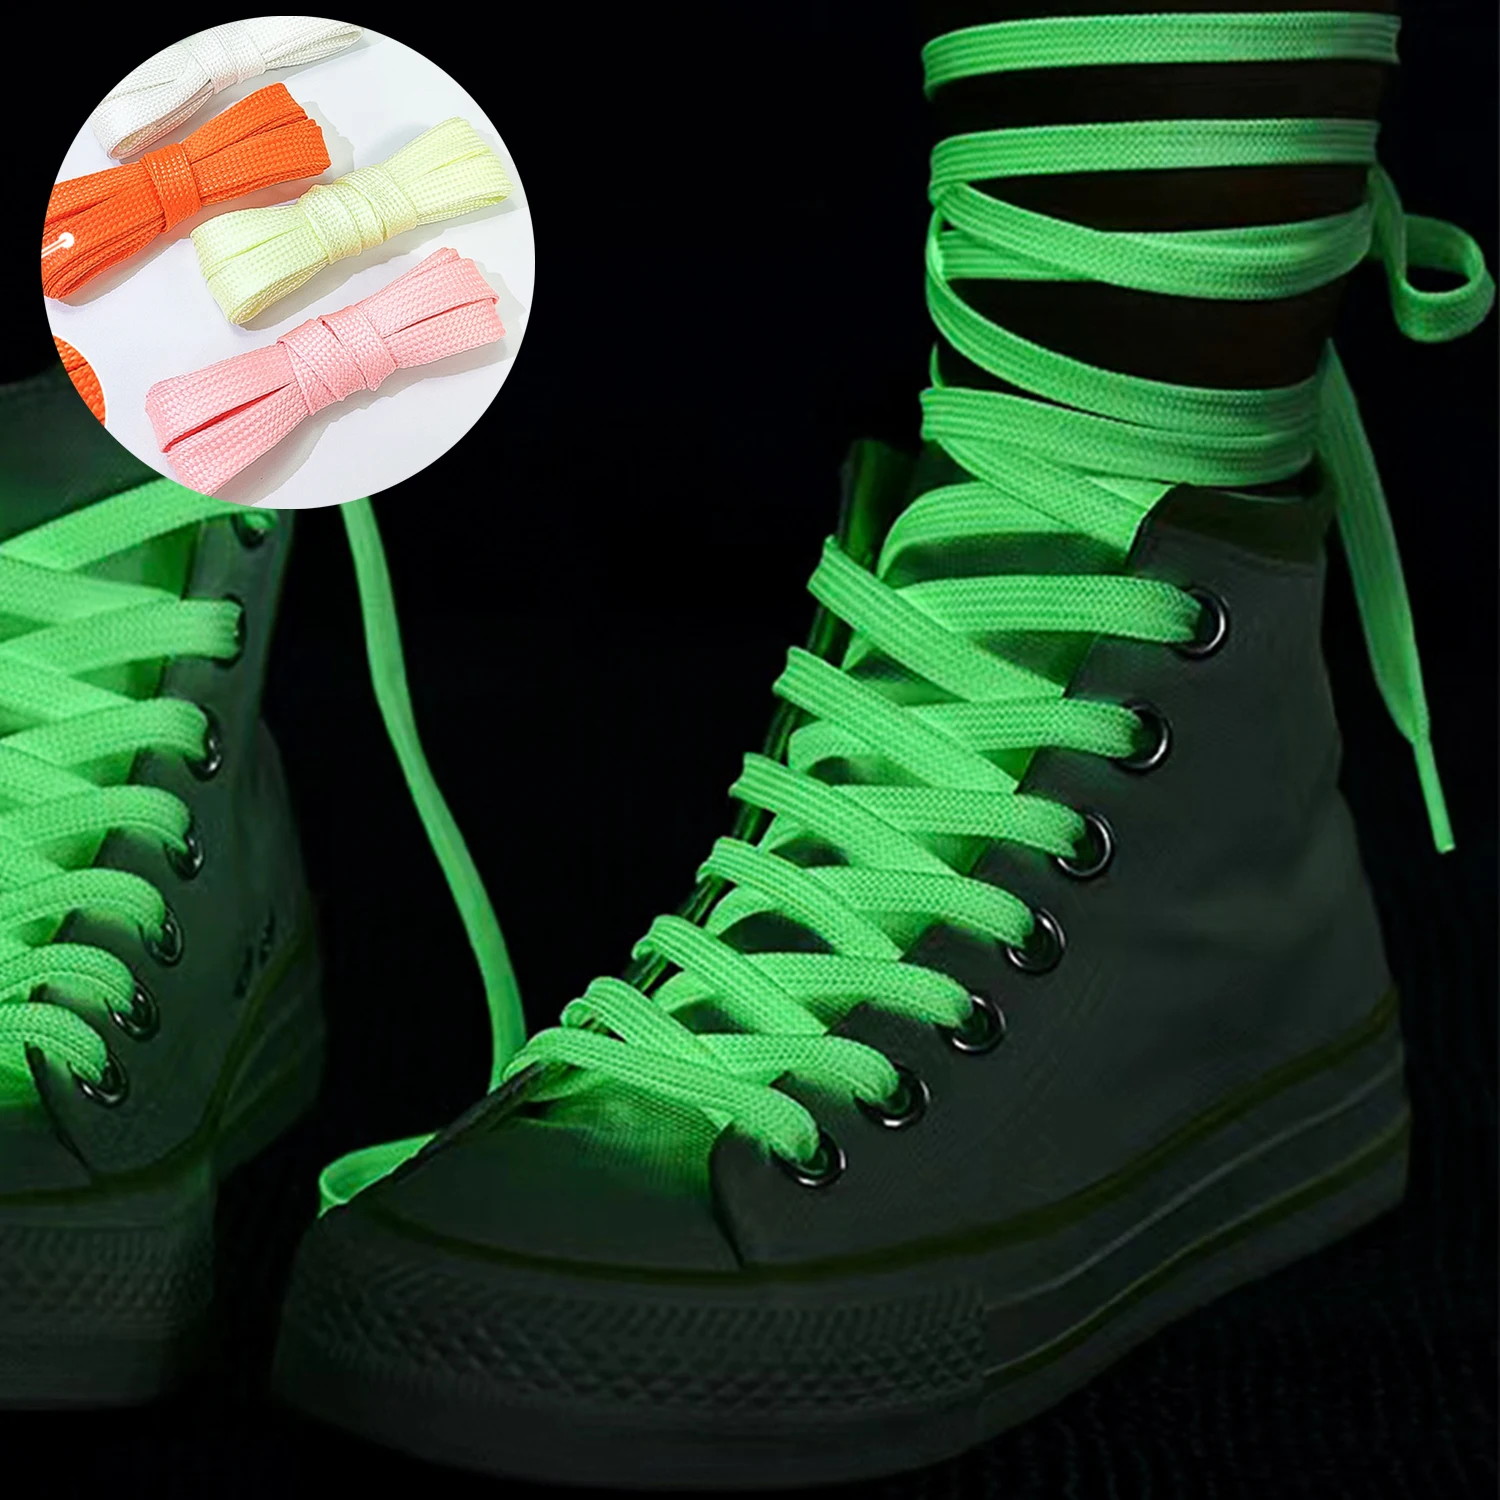 

1 Pair 160cm Flat Reflective Runner Shoe Laces Safety Luminous Glowing Shoelaces Unisex For Hiking Sport Basketball Canvas Shoes